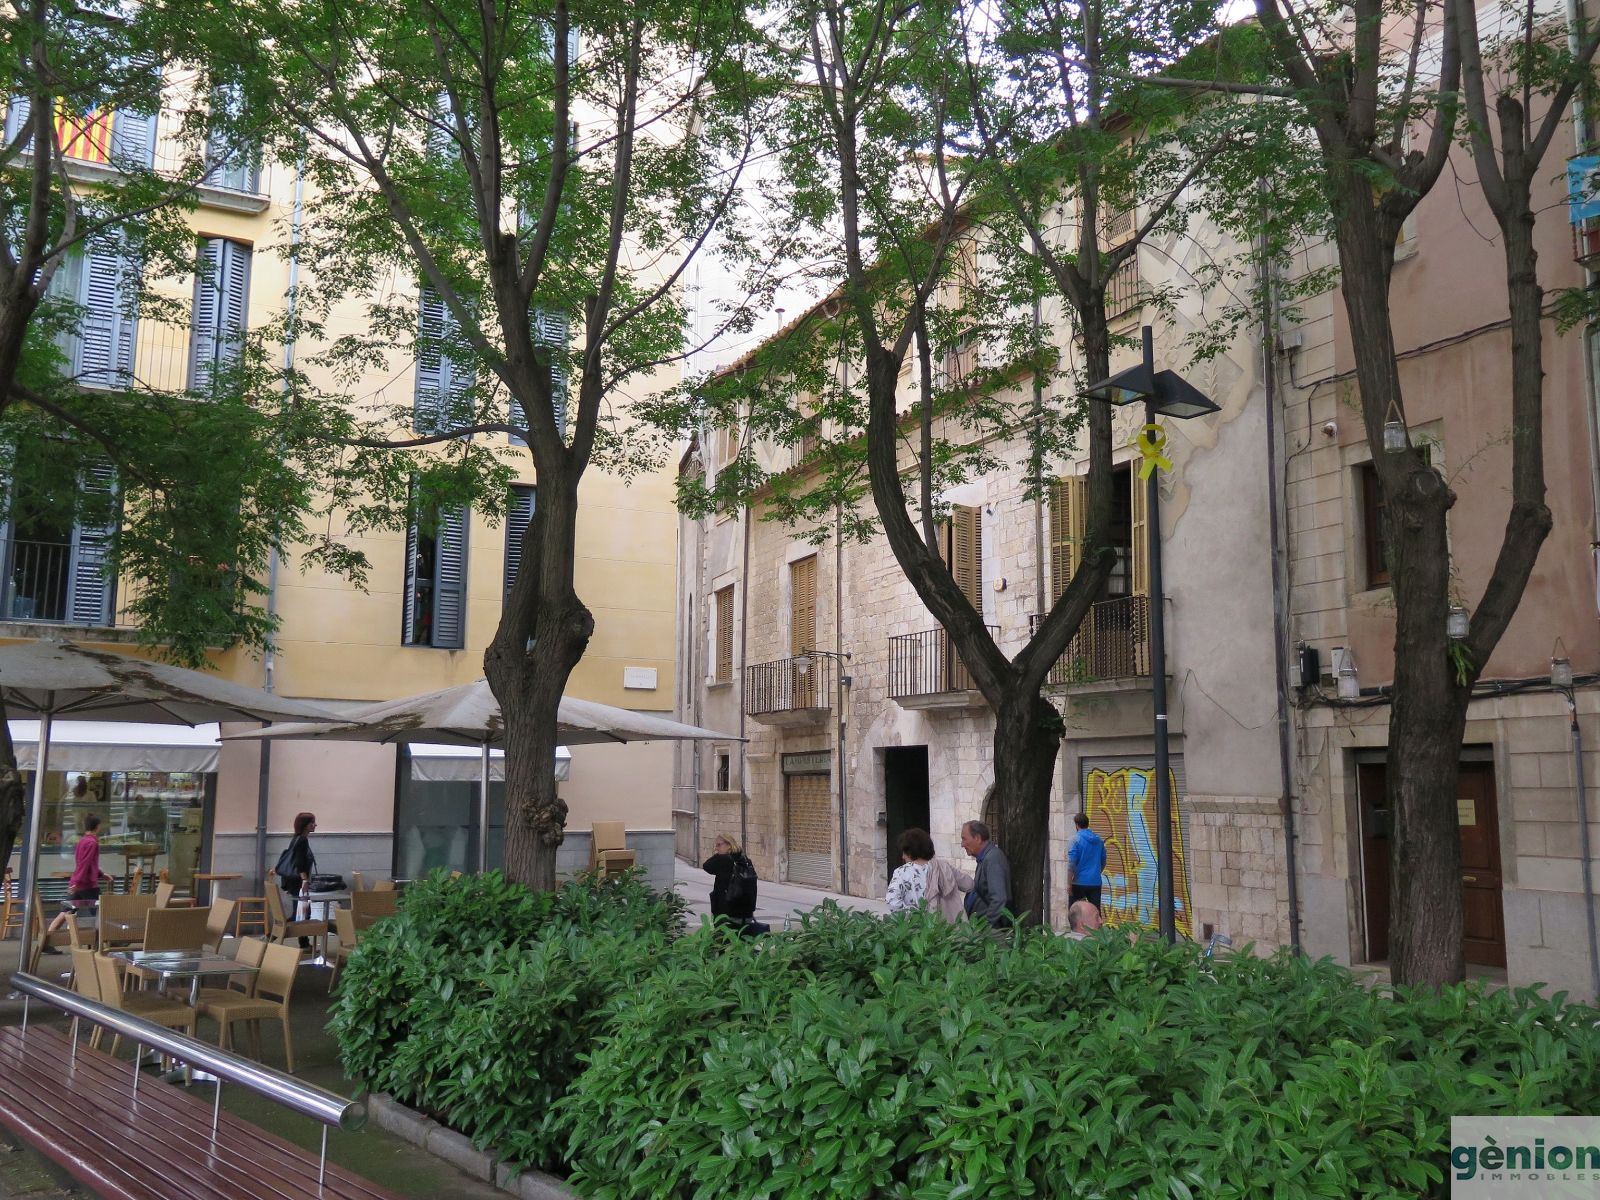 BUILDING IN GIRONA, BARRI VELL. RIGHT IN THE CENTRE, SUITABLE FOR HOTEL OR EXCLUSIVE FLATS